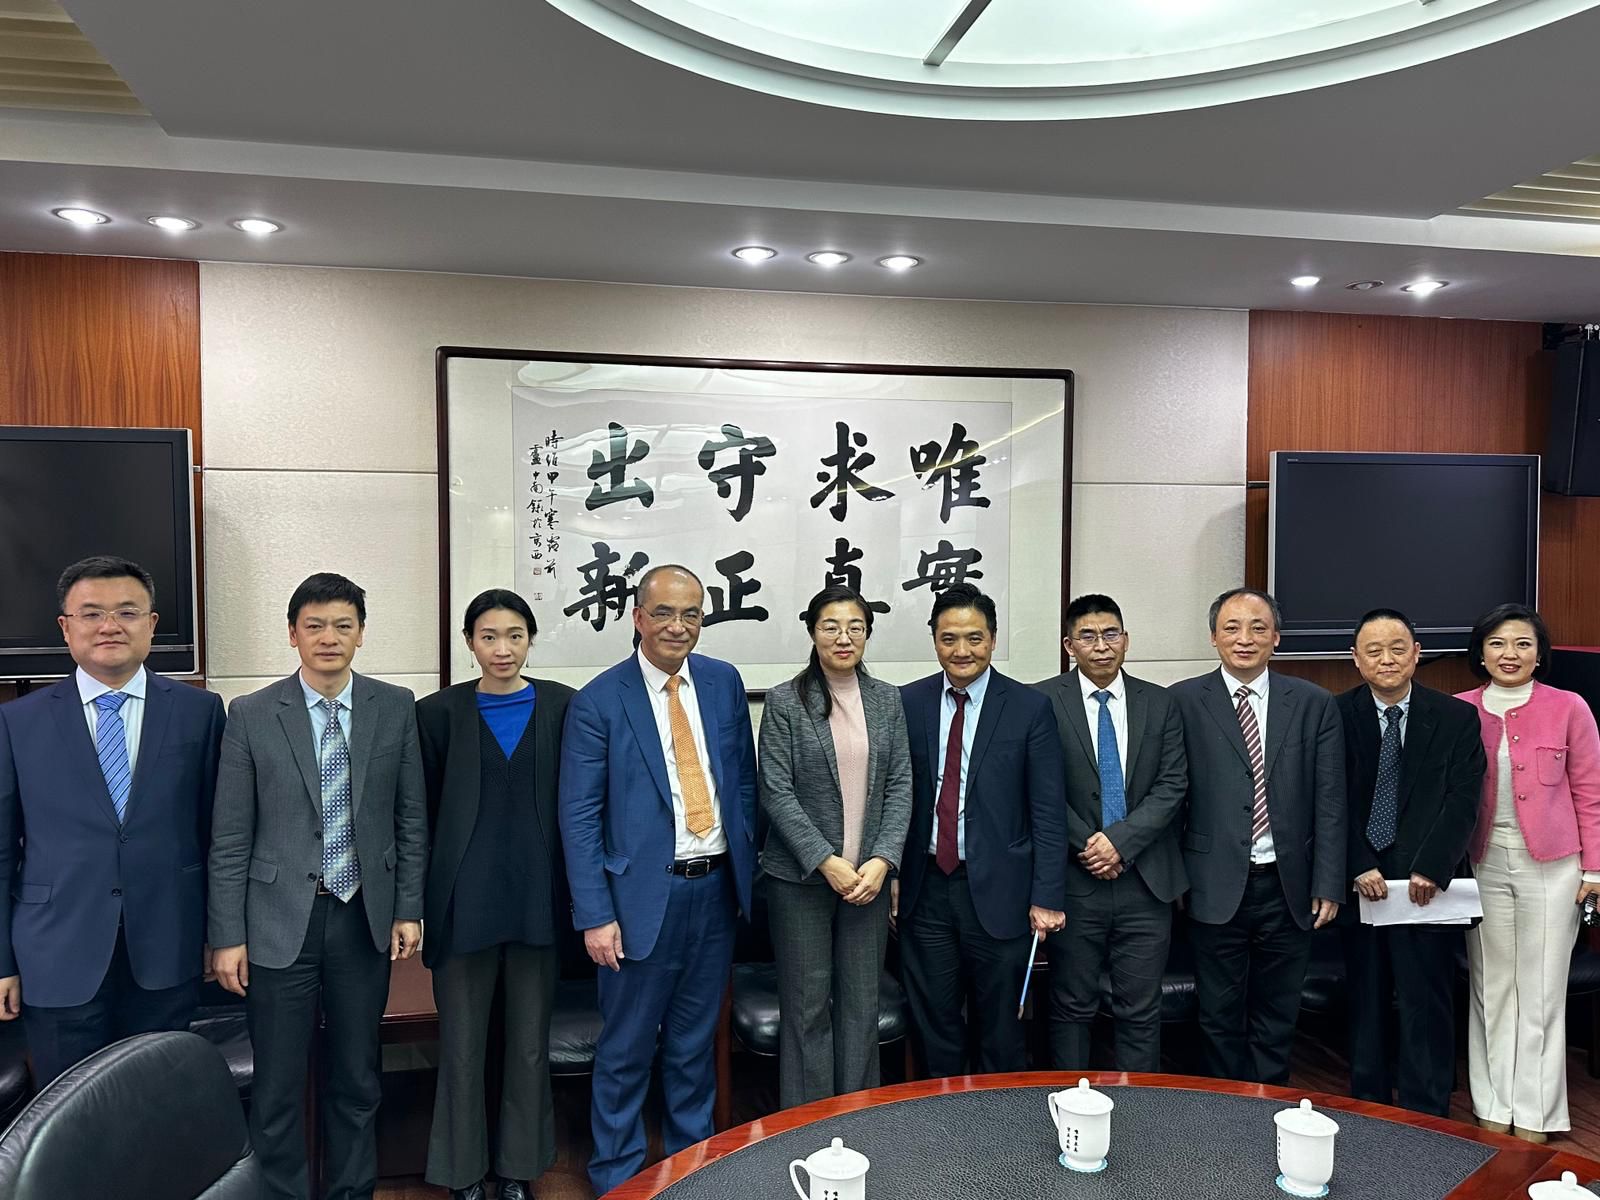 Dr Stephen Wong, Head of the CEPU, Dr Wang Chunxin, Deputy Head of the CEPU, and research colleagues visited the Development Research Centre of the State Council.